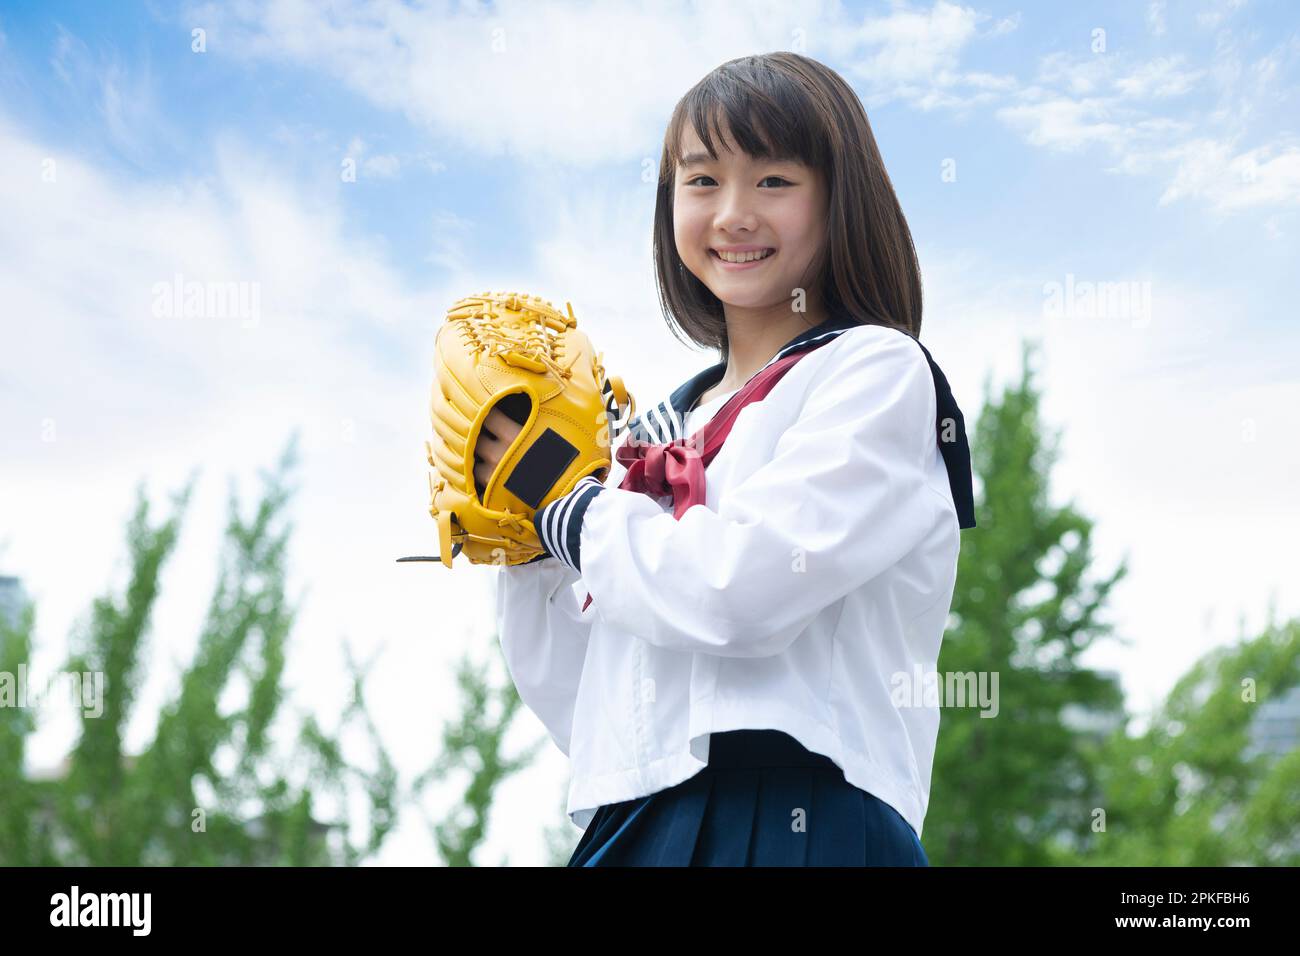 Junior high school students playing catch Stock Photo